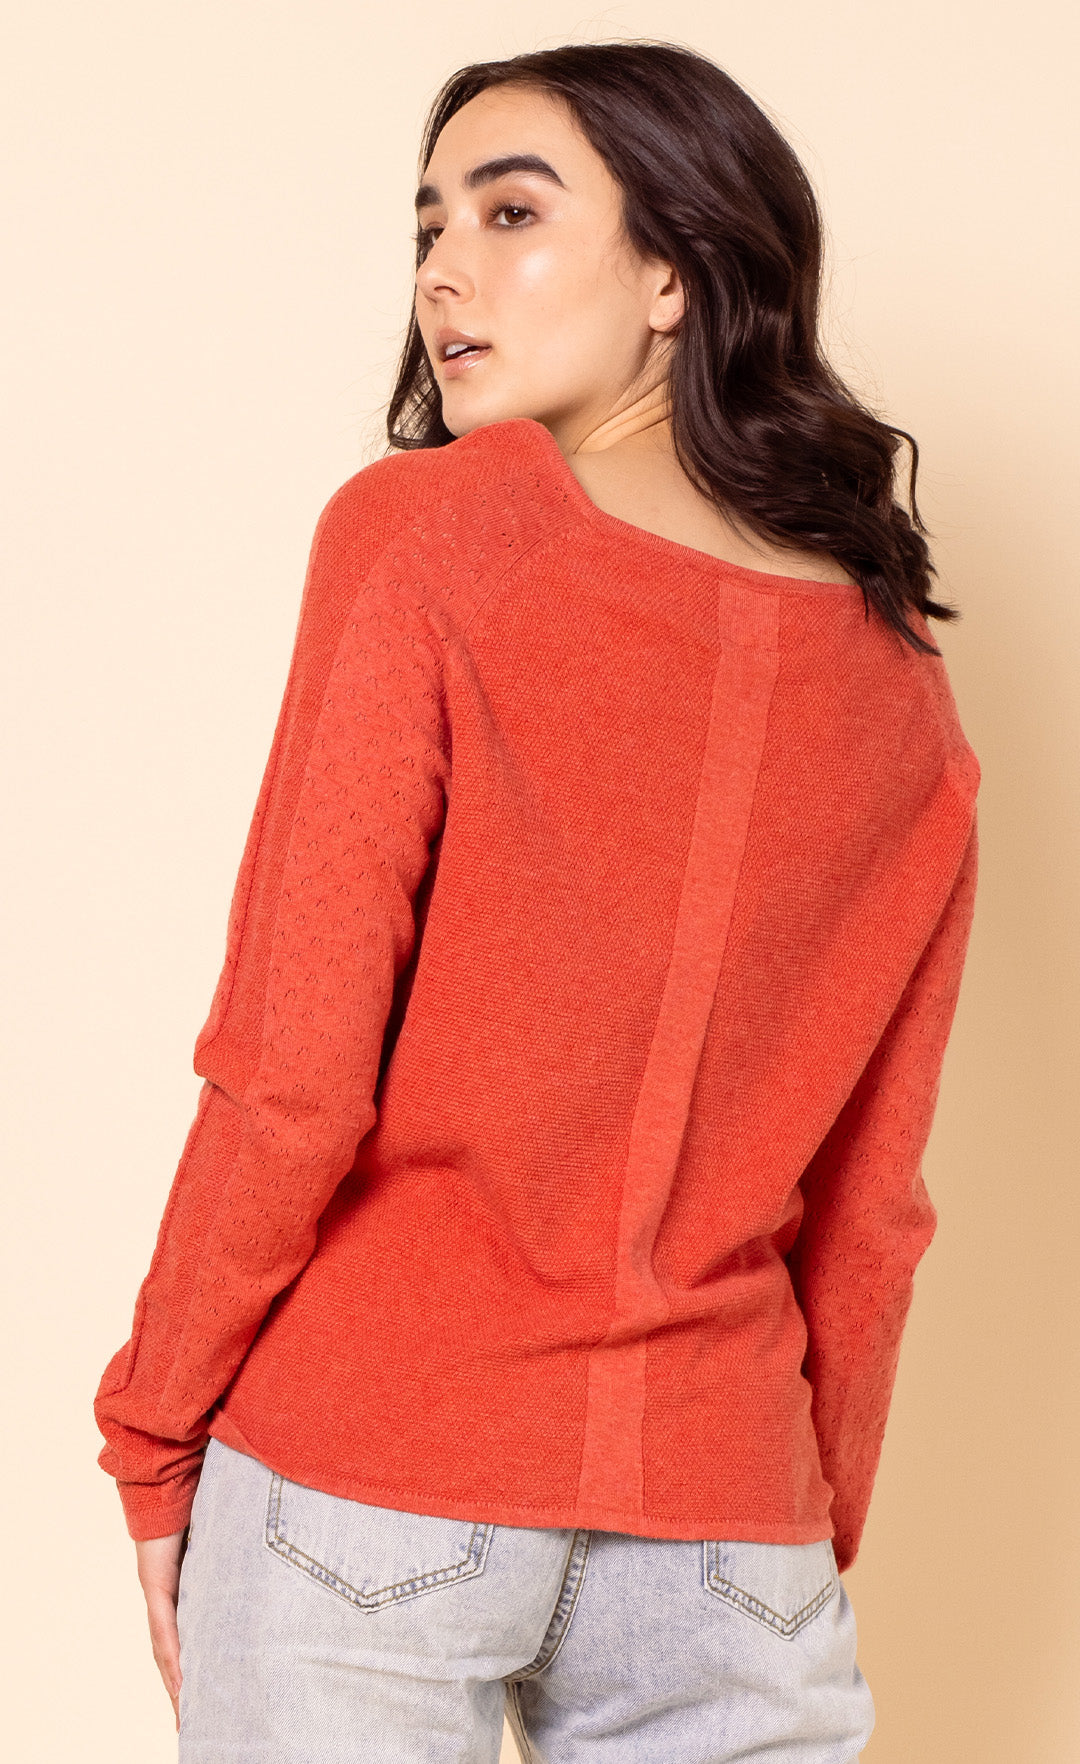 The Nova Sweater - Pink Martini Collection